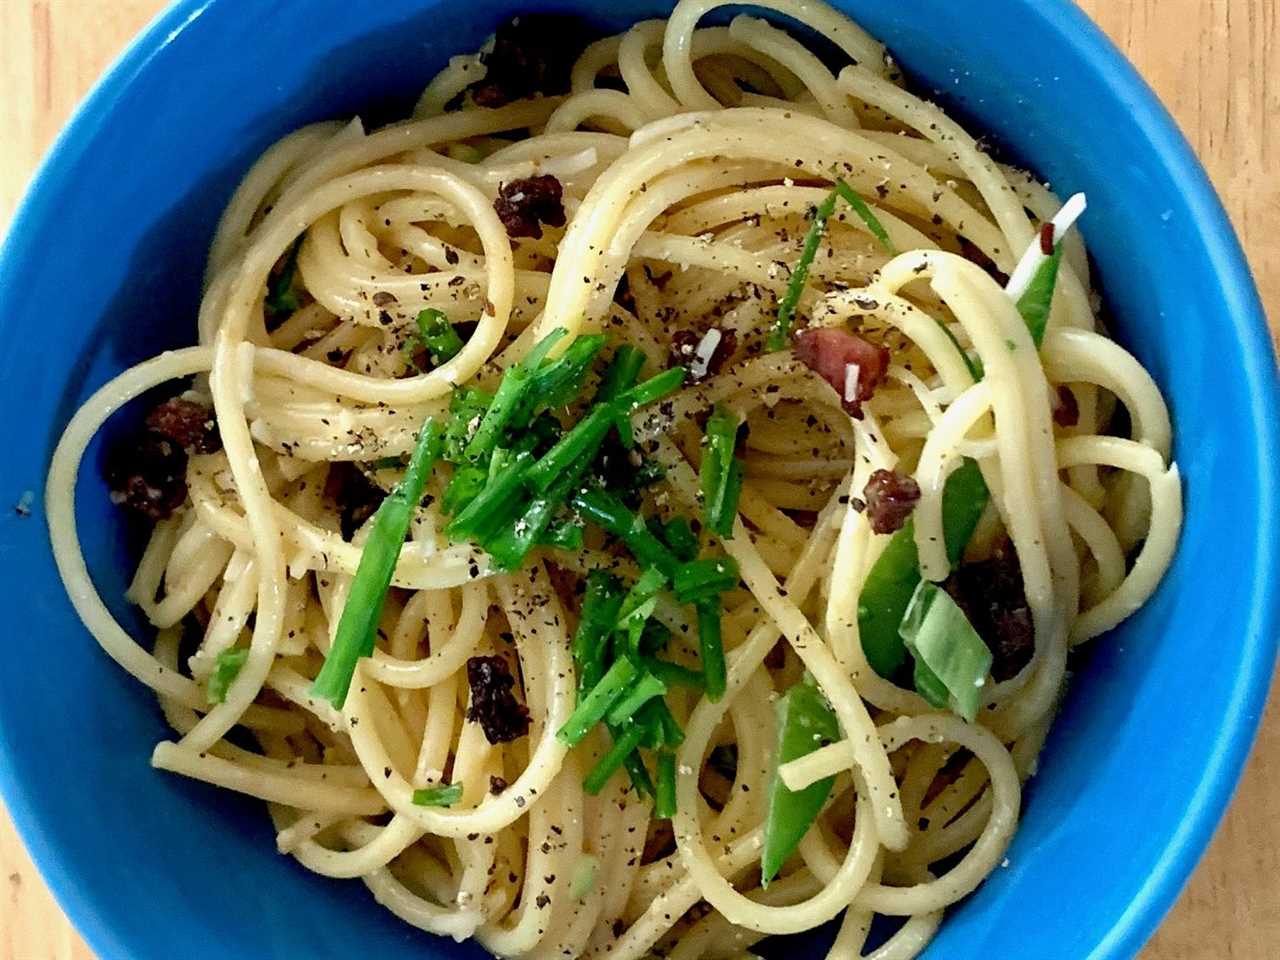 I made Ina Garten's spring spaghetti carbonara and had dinner ready in 30 minutes